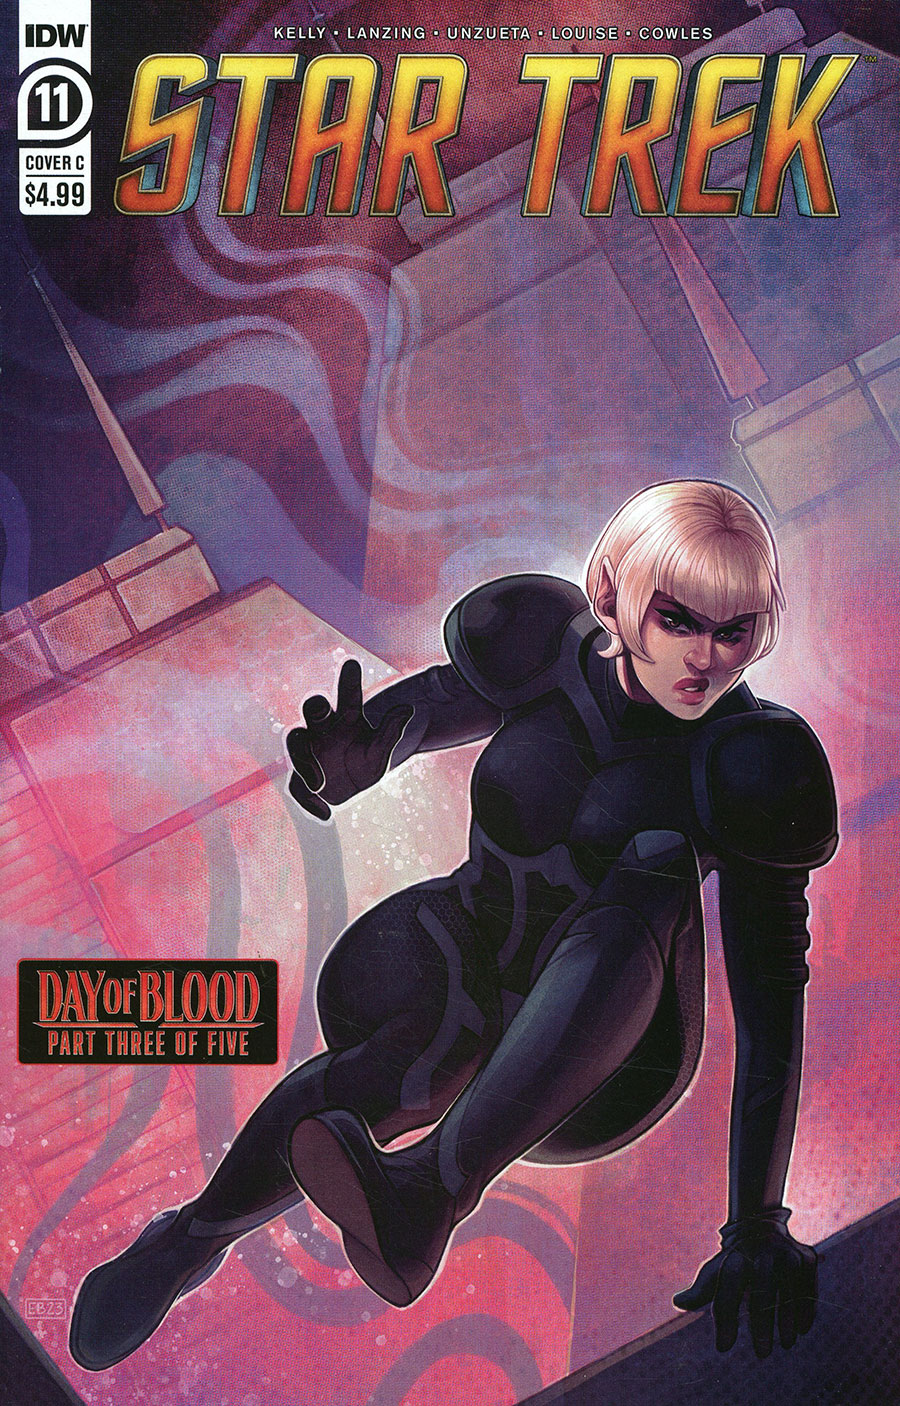 Star Trek (IDW) Vol 2 #11 Cover C Variant Elizabeth Beals Cover (Day Of Blood Part 3)